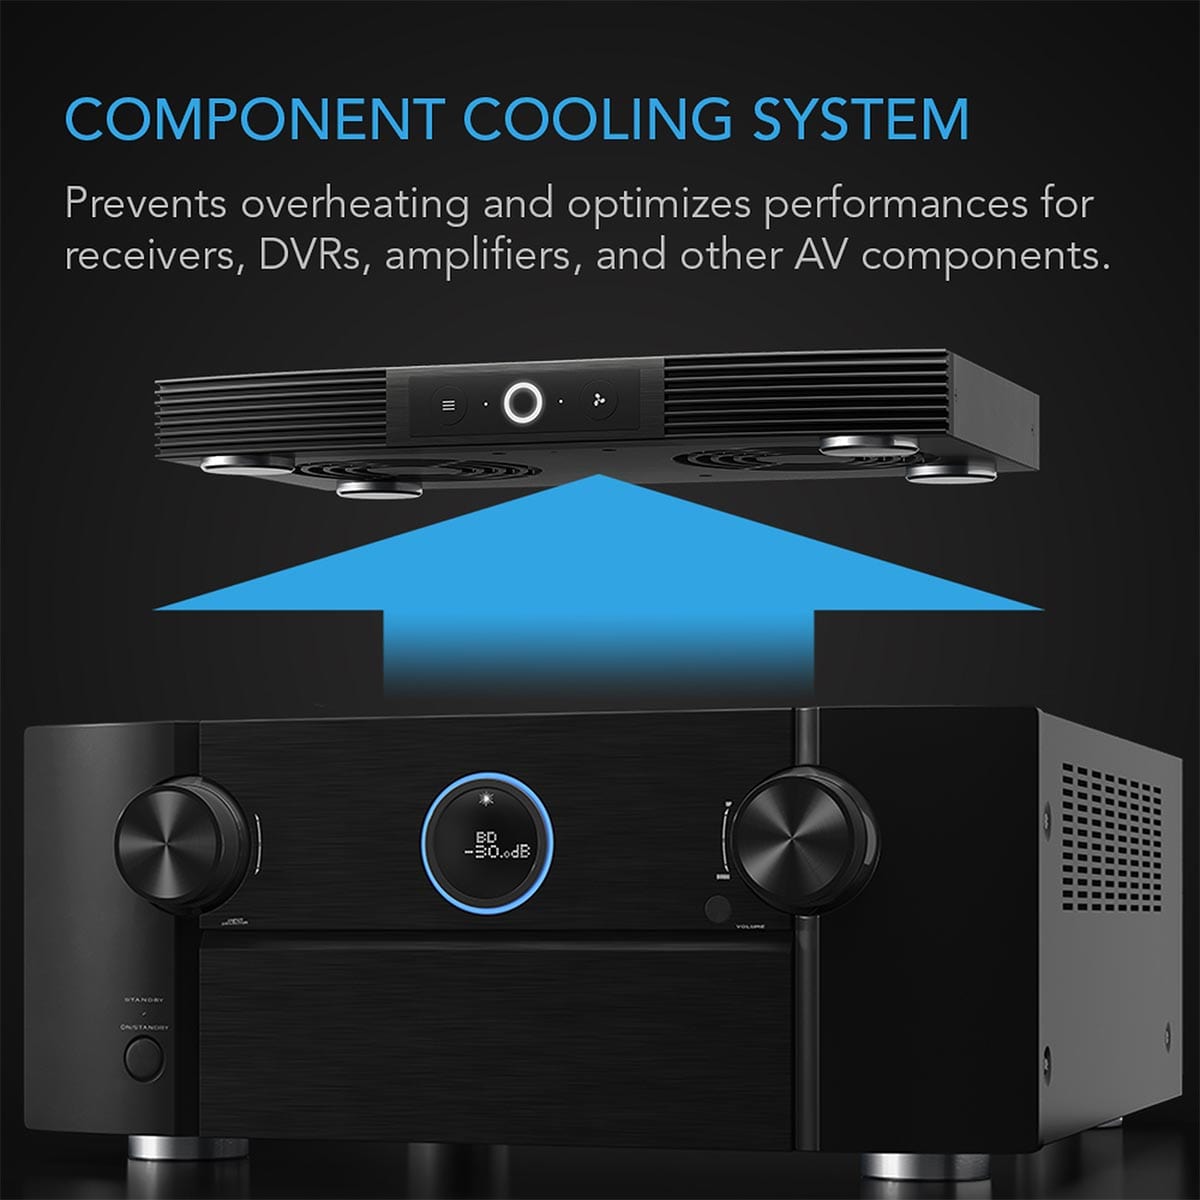 AC Infinity C Infinity AIRCOM S7 AV Component Cooling System - Top Exhaust Component Cooling